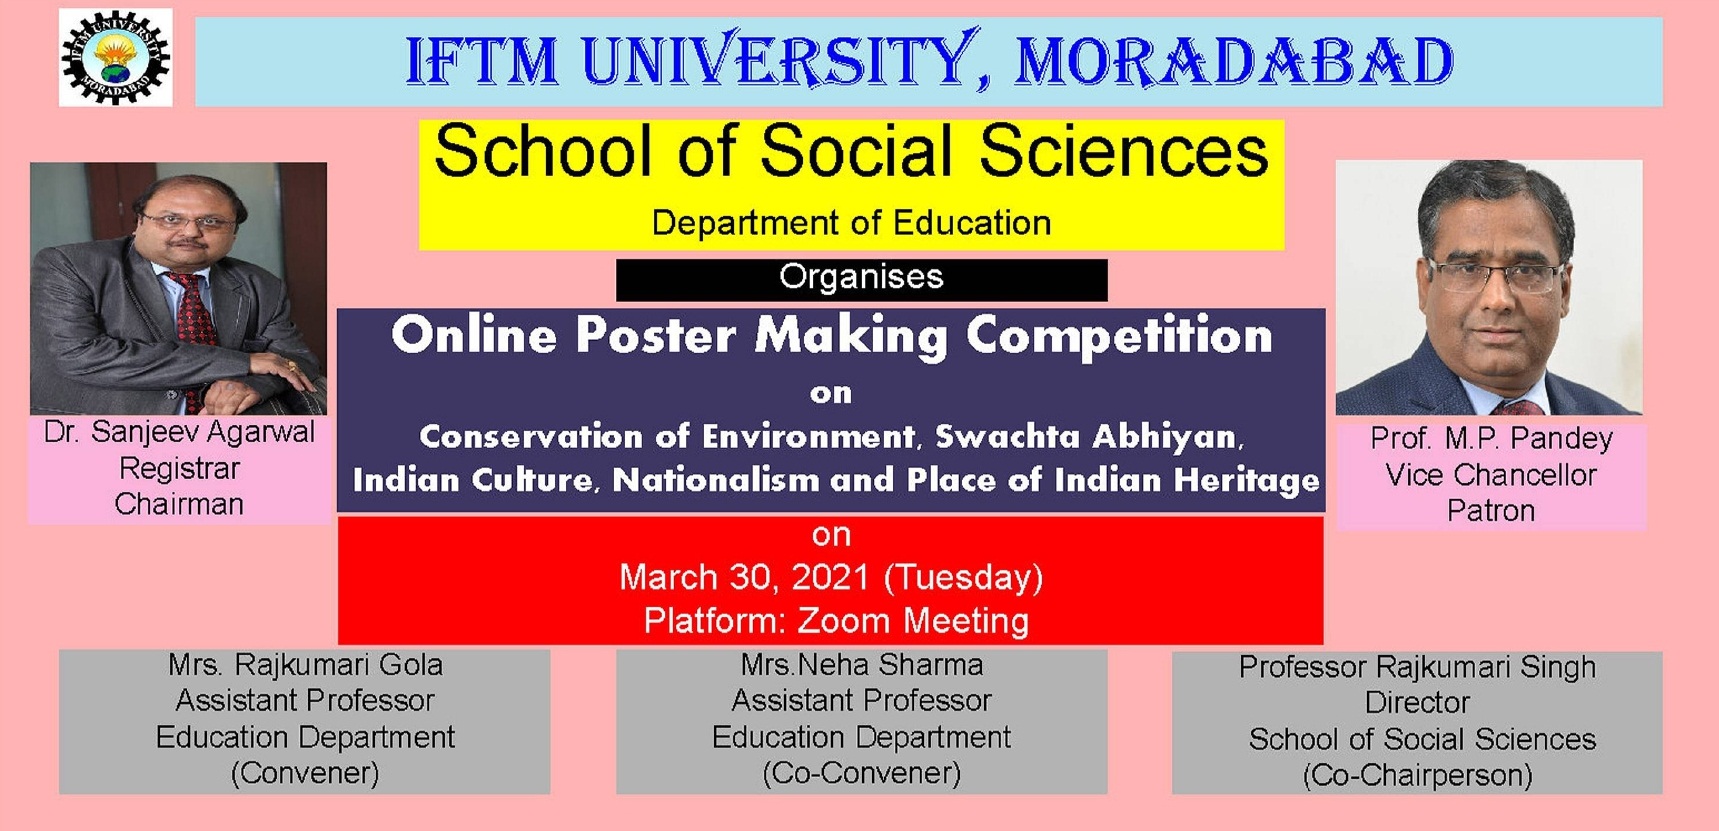 Online Poster Making Competition on “Conservation of Environment, Swachhta Abhiyan, Indian Culture, Nationalism and Places of Indian Heritage”